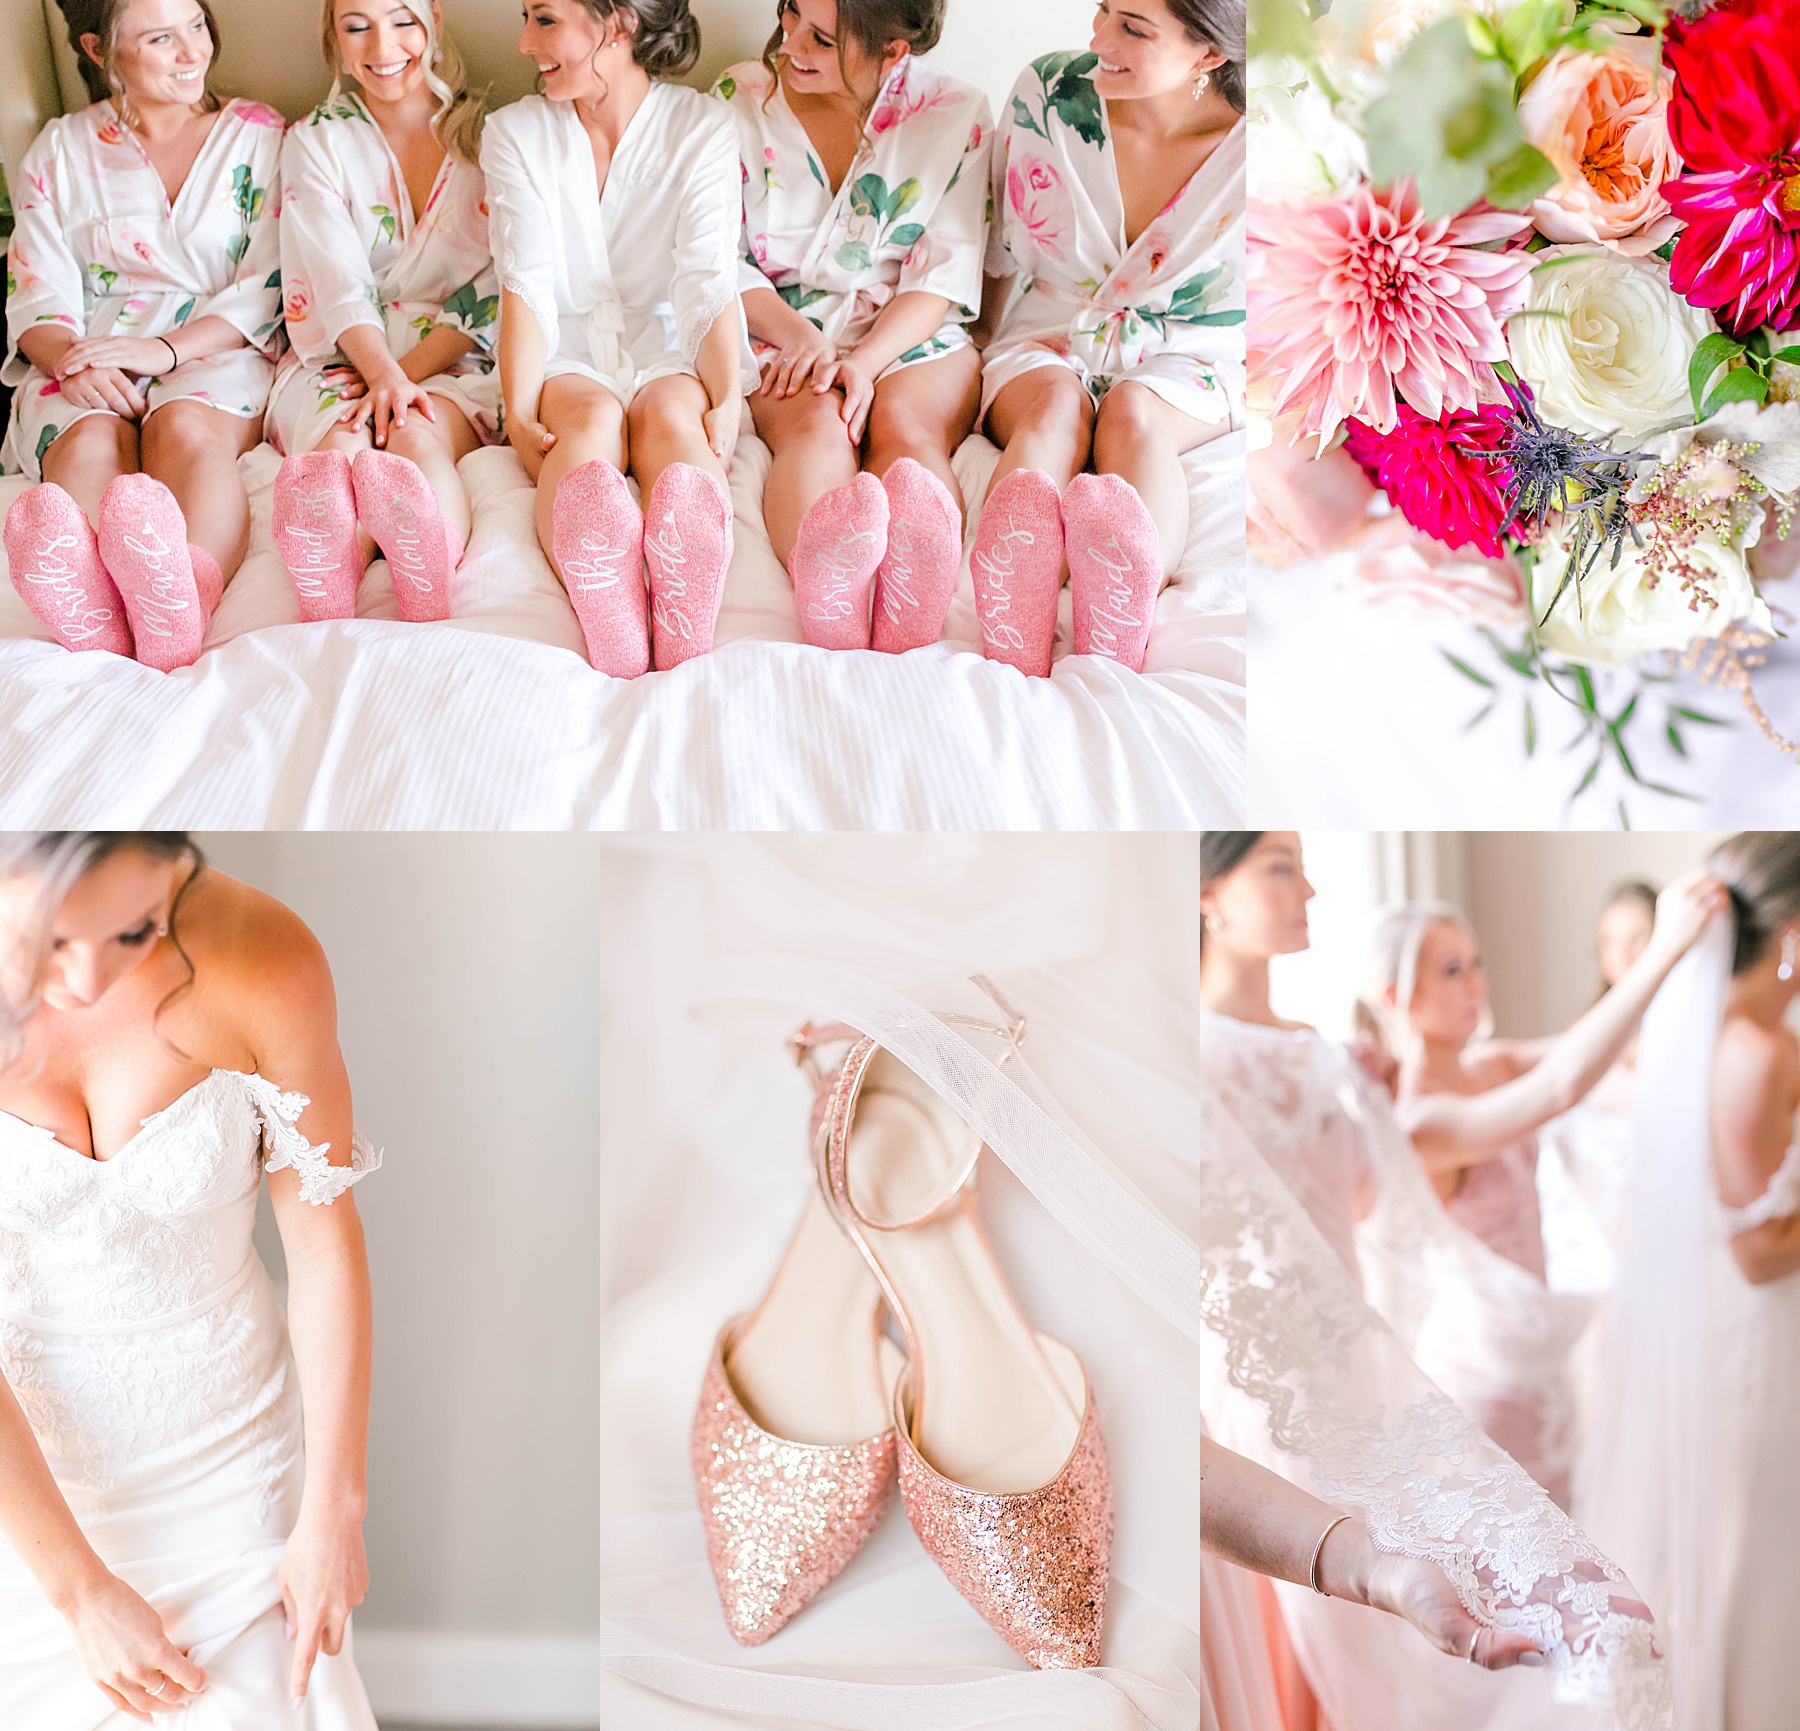 Five getting ready tips for your wedding day